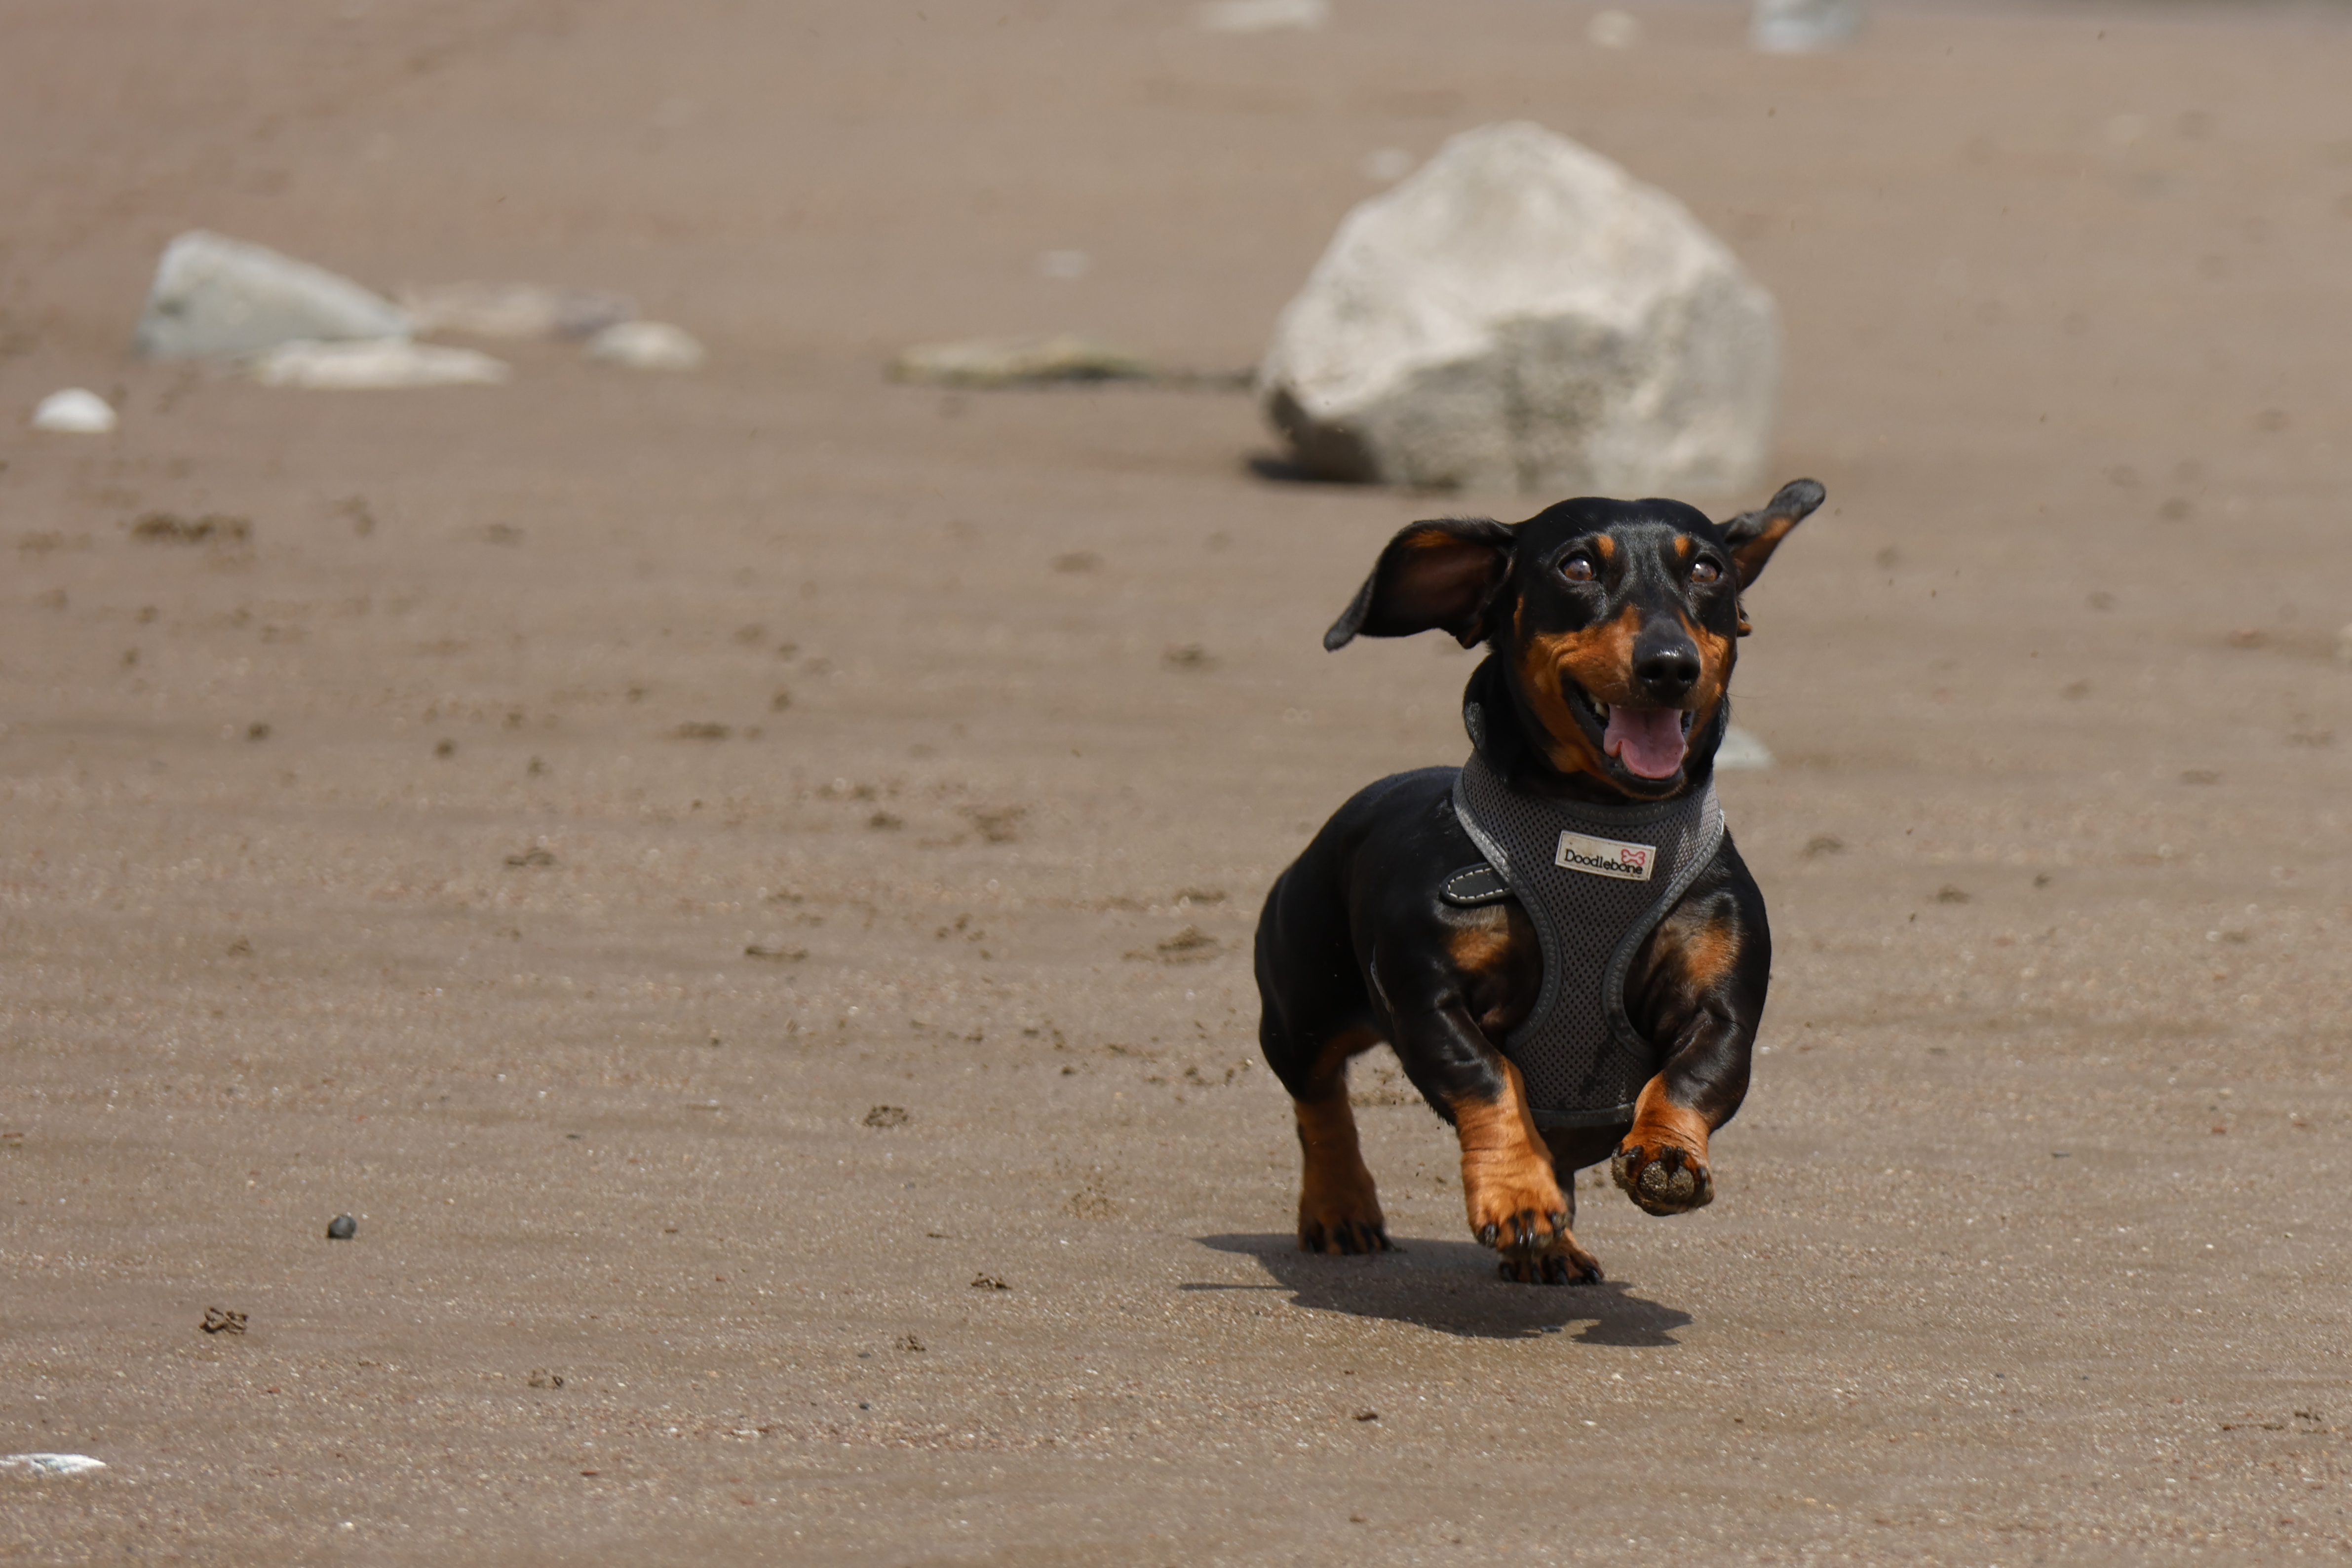 A small dog running on the beach